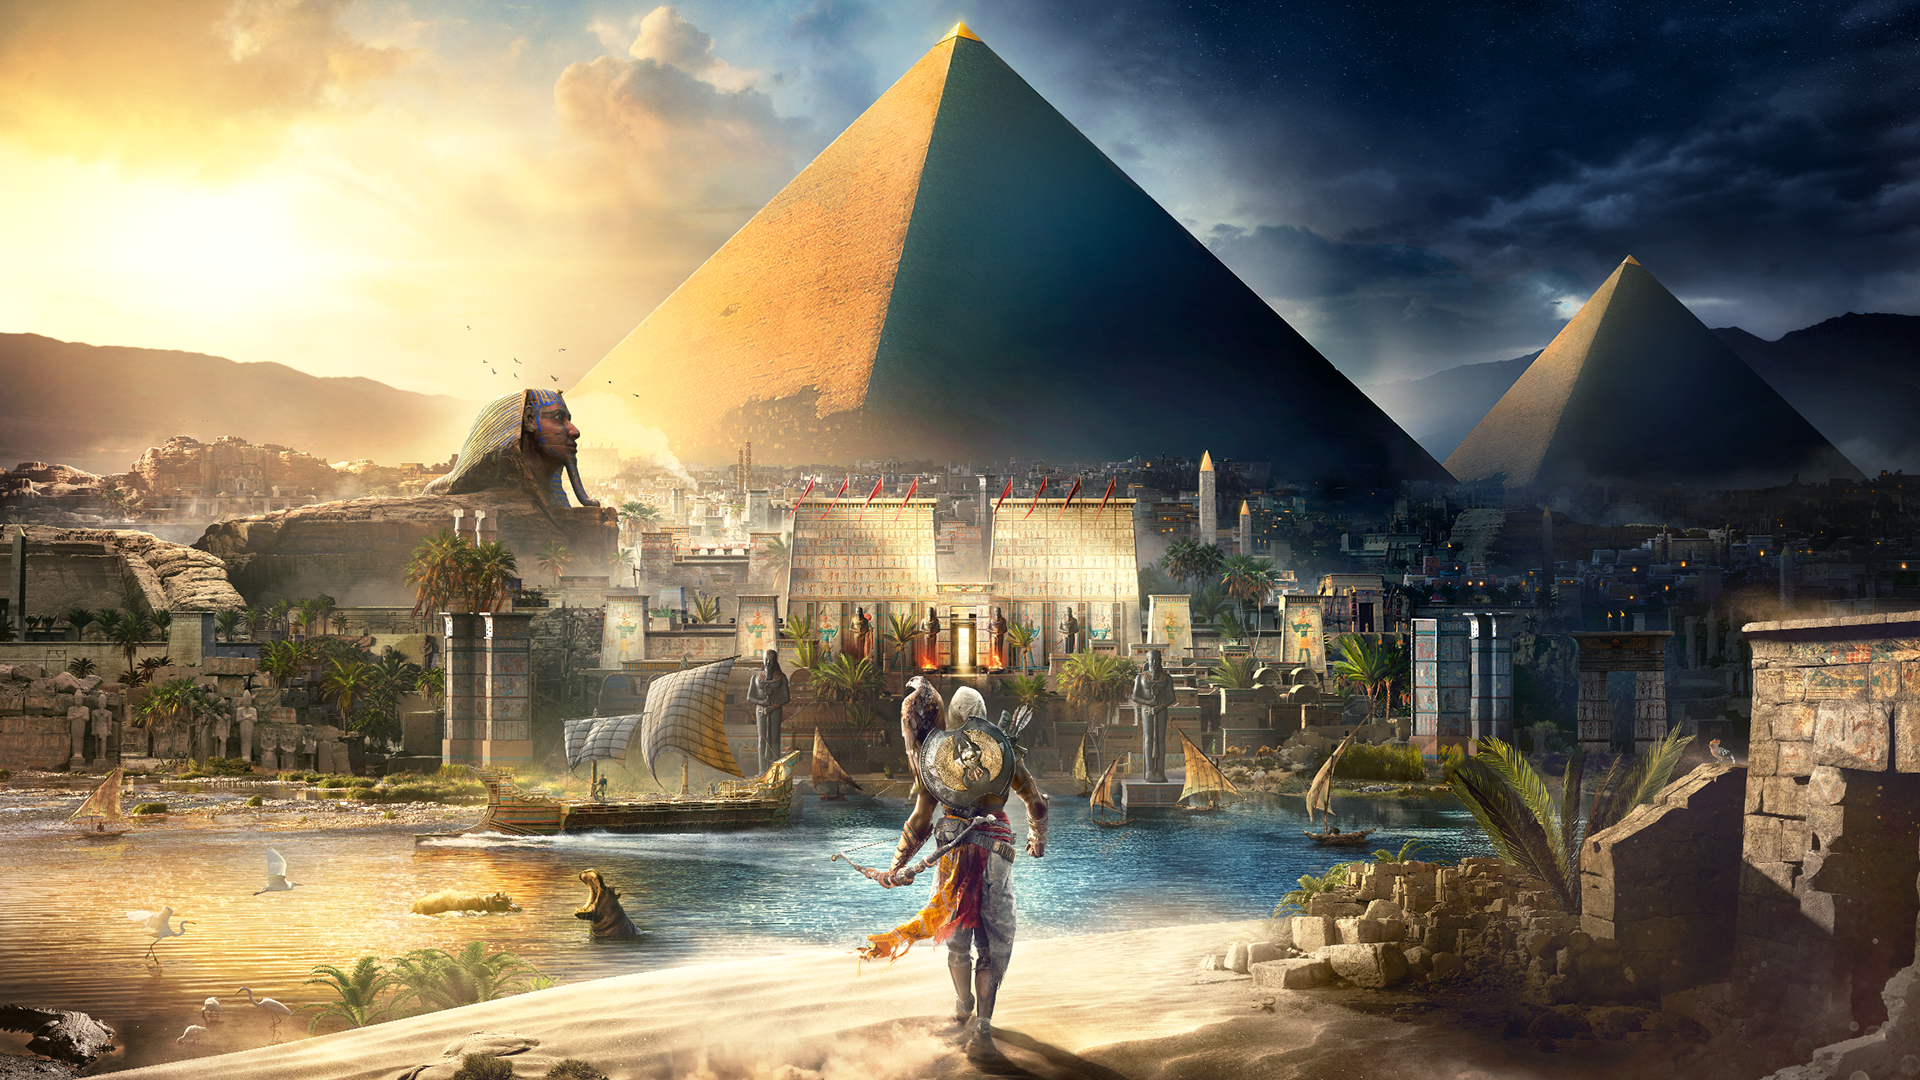 General 1920x1080 Assassin's Creed Assassin's Creed: Origins video games video game art